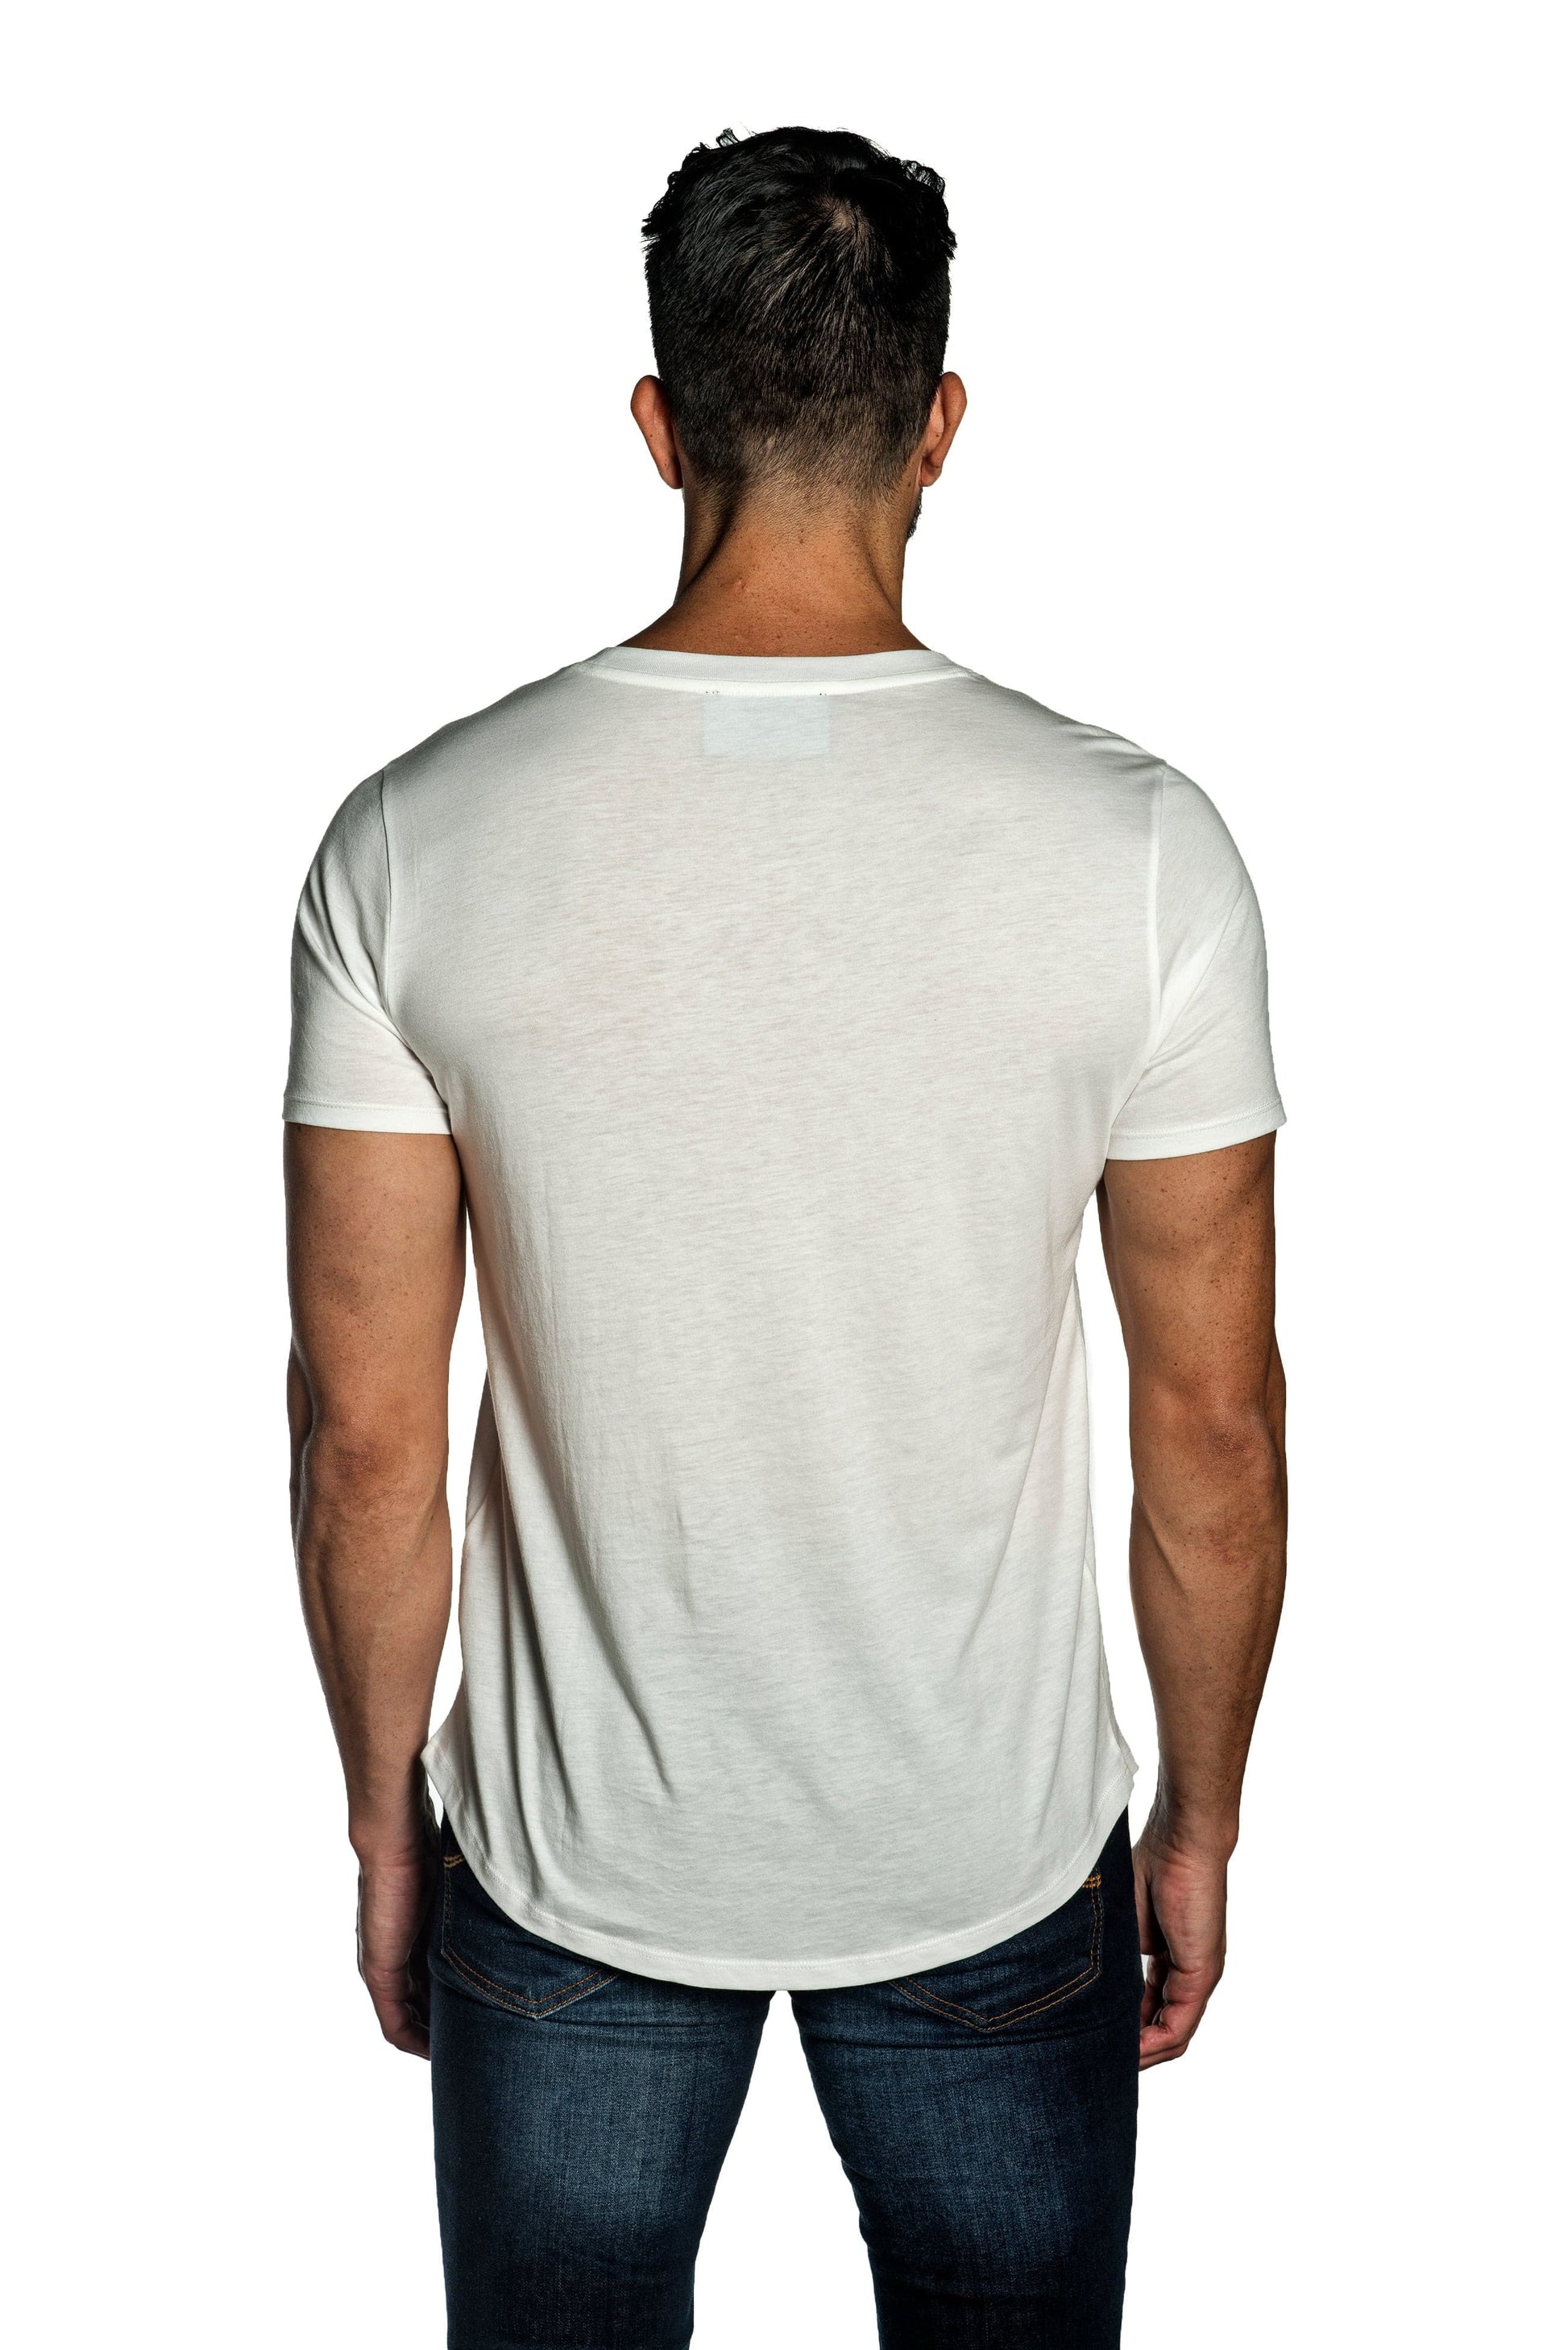 White Mens Tee With Star Embroidery TEE-27.